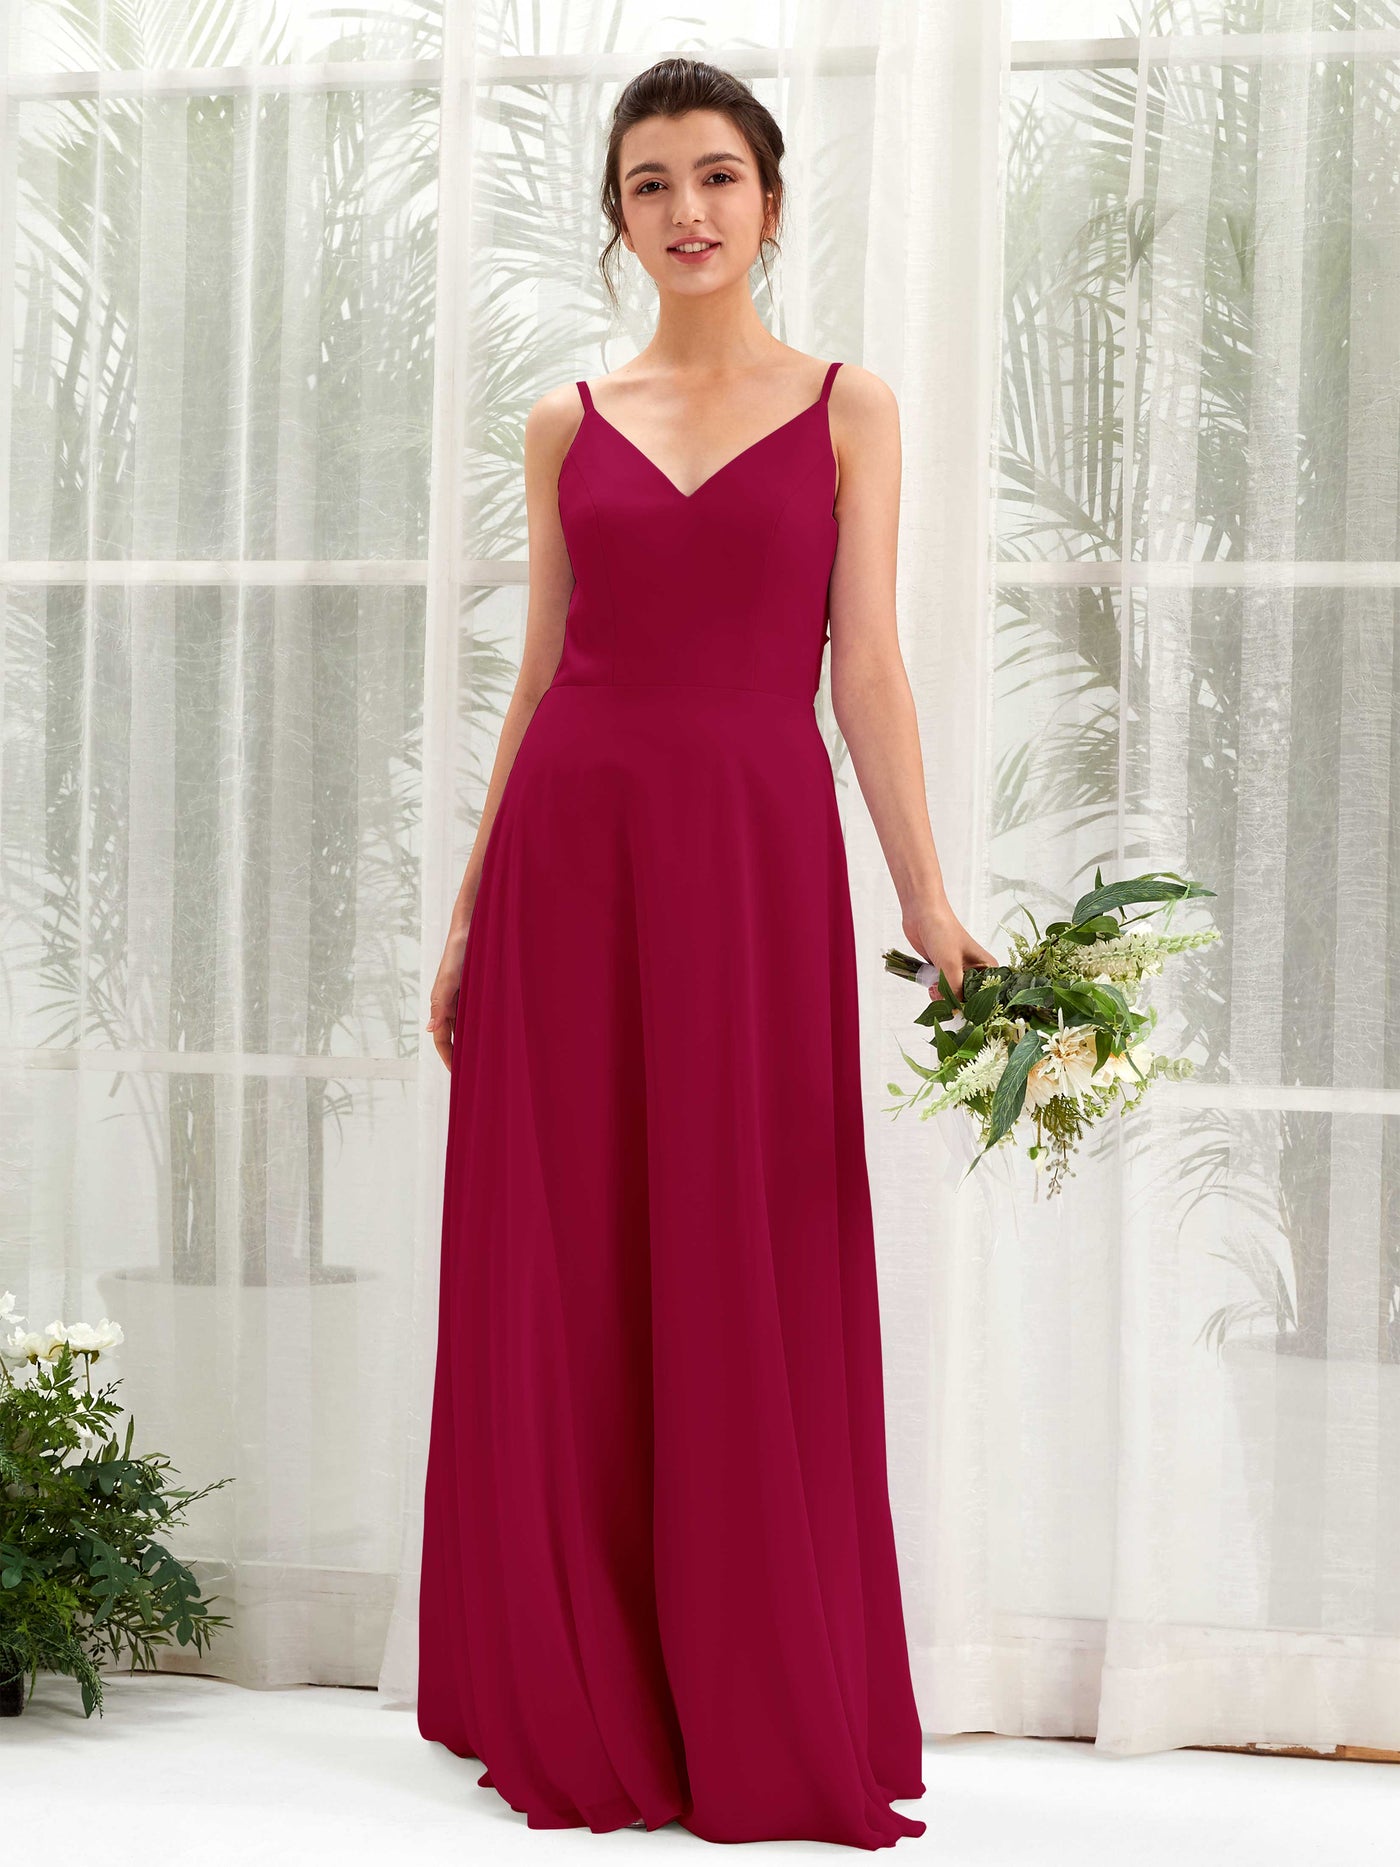 Jester Red Bridesmaid Dresses Bridesmaid Dress A-line Chiffon Spaghetti-straps Full Length Sleeveless Wedding Party Dress (81220641)#color_jester-red